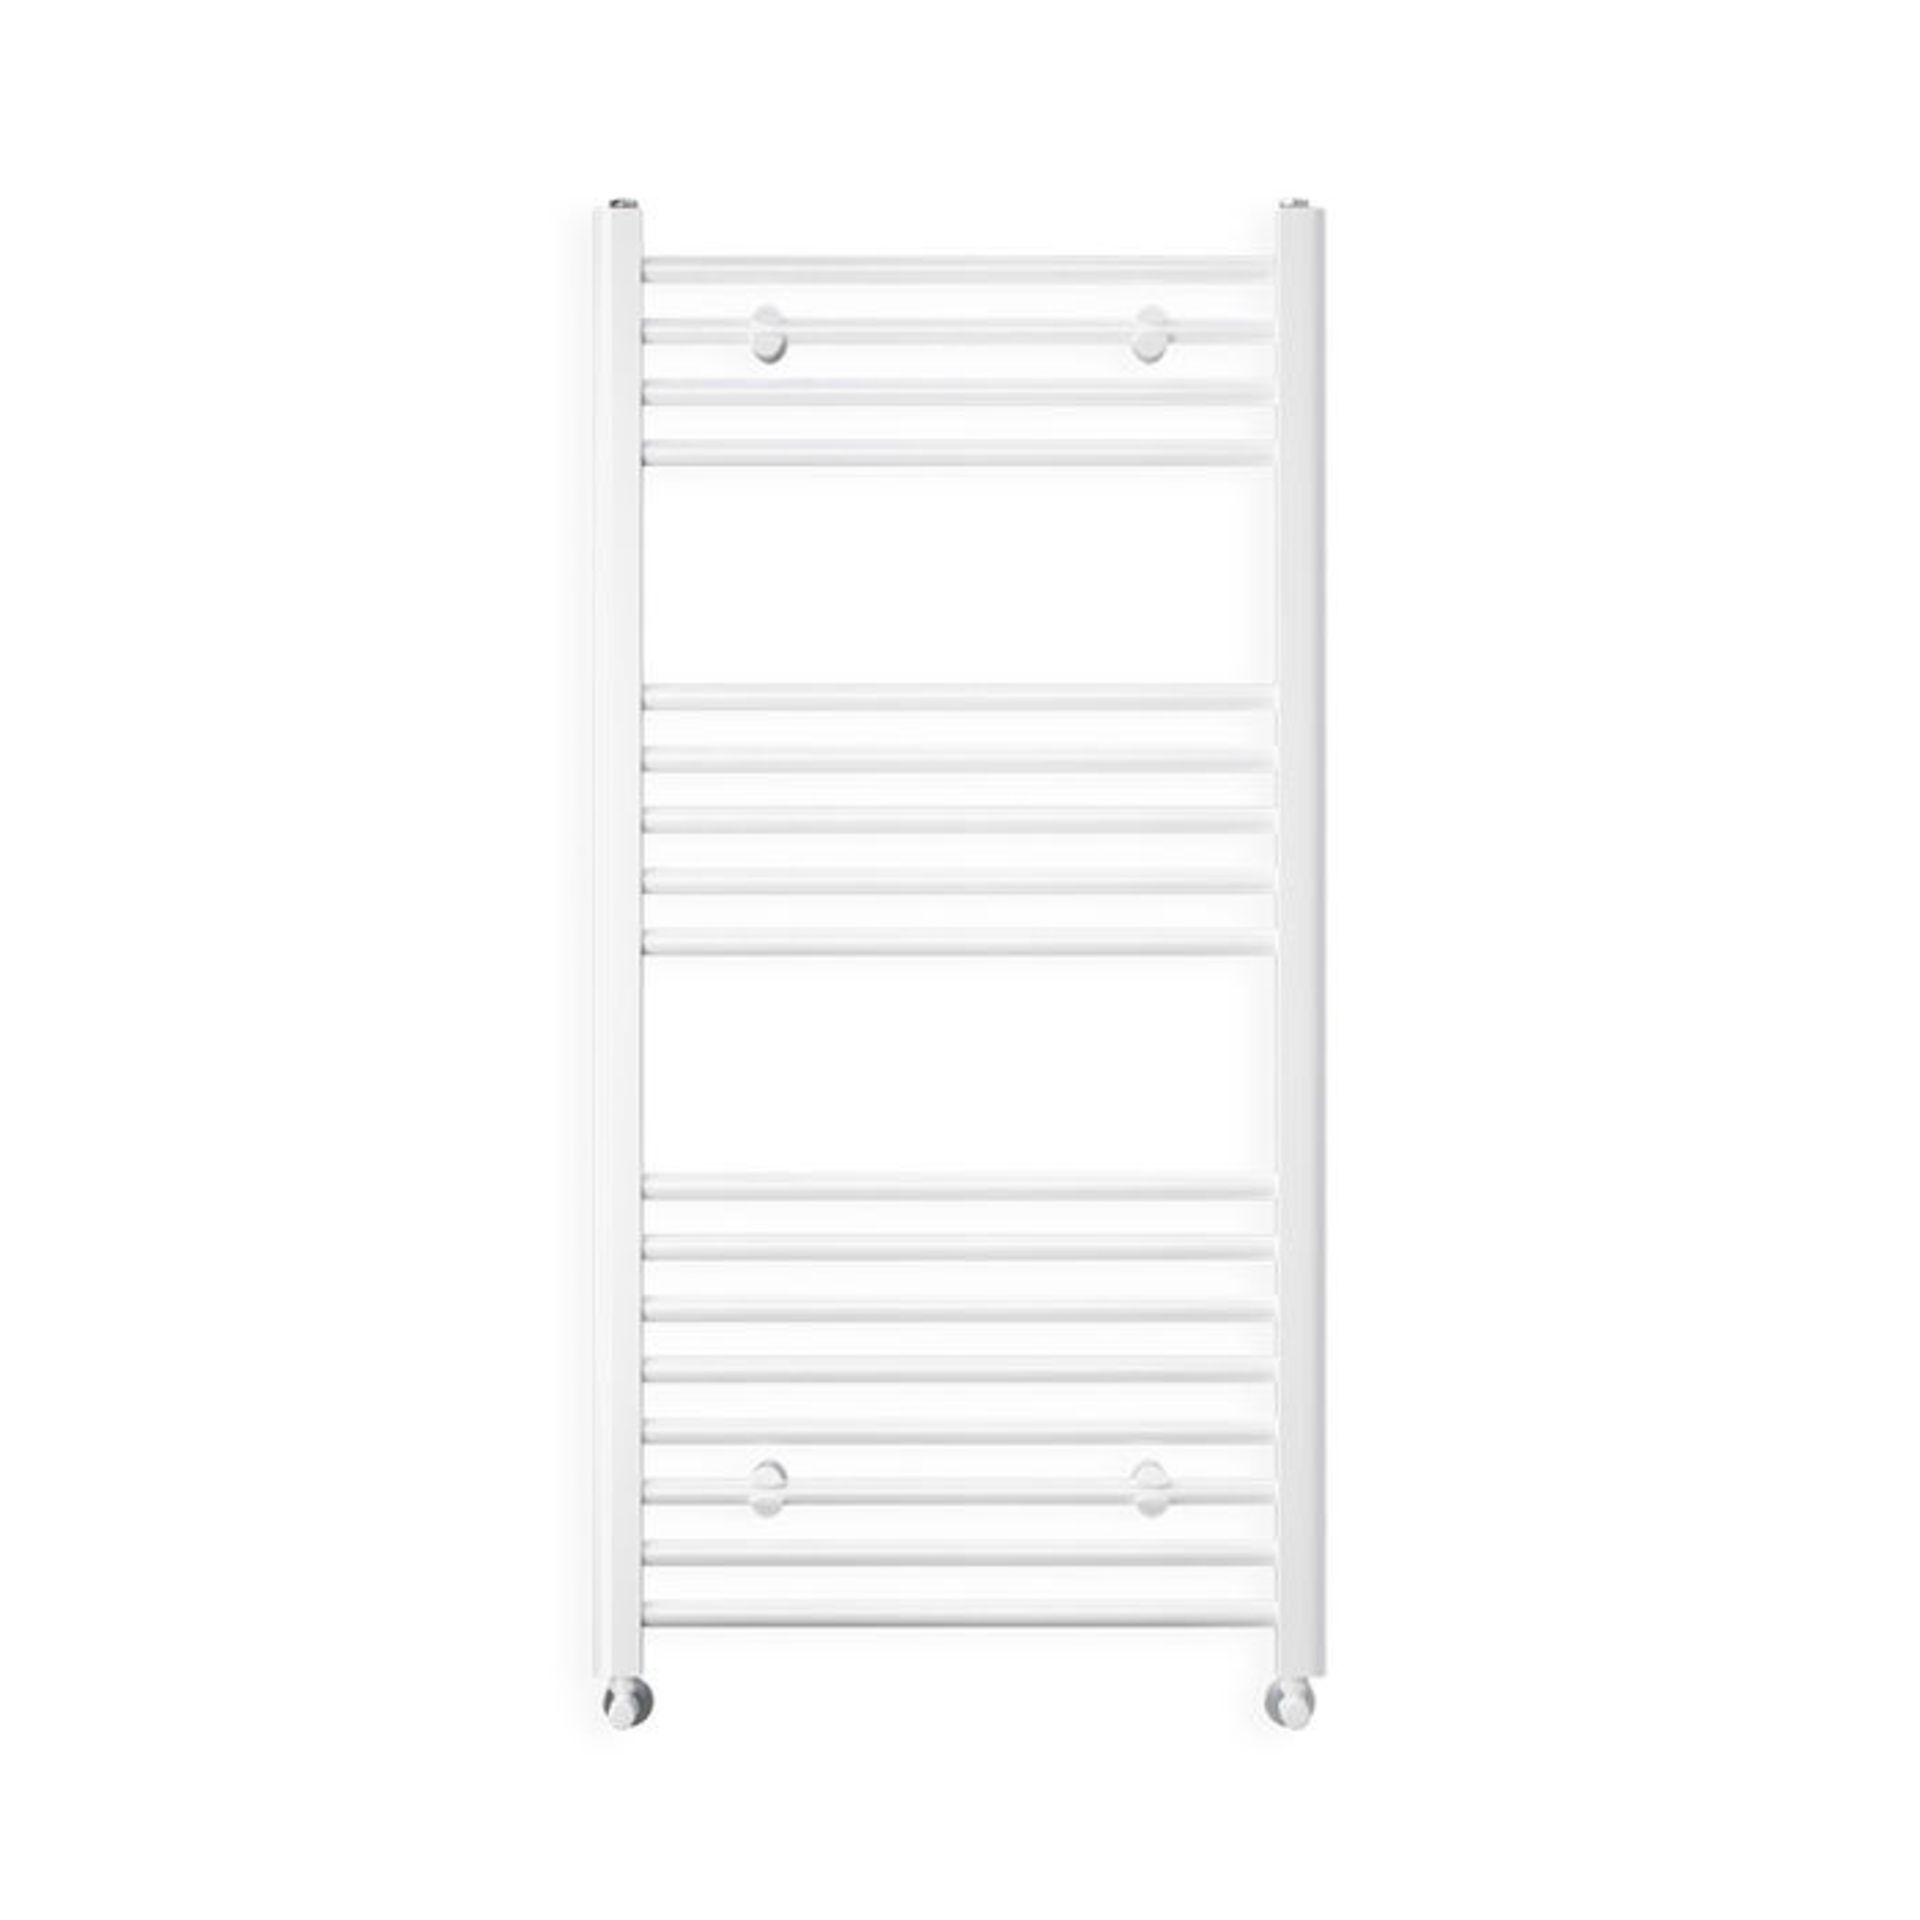 (XX91) 1000x600mm White Heated Towel Radiator. Made from low carbon steel Finished with a hig...( - Image 2 of 2